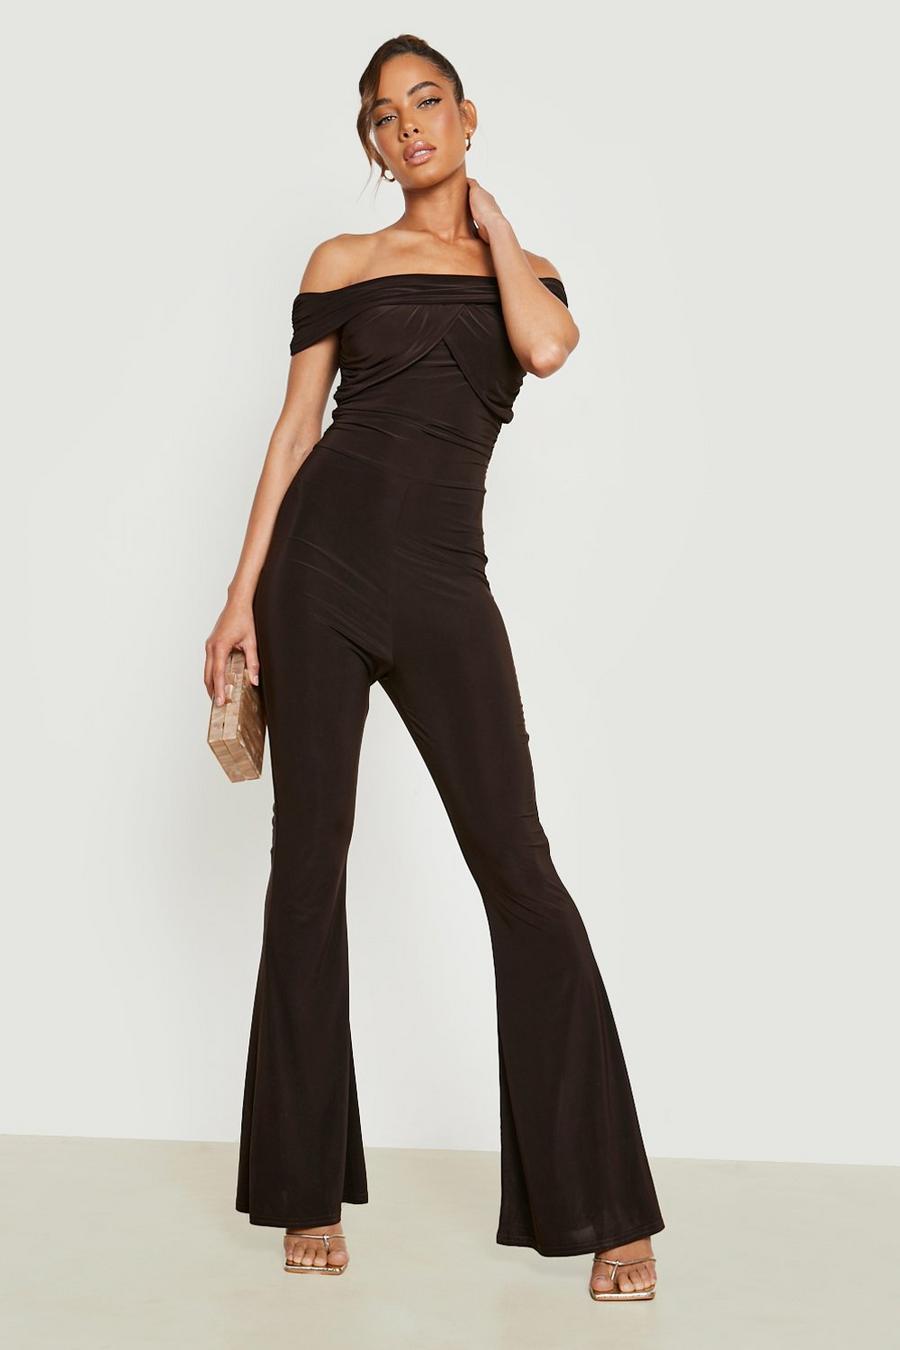 Chocolate brown Slinky Bardot Ruched Flared Leg Jumpsuit